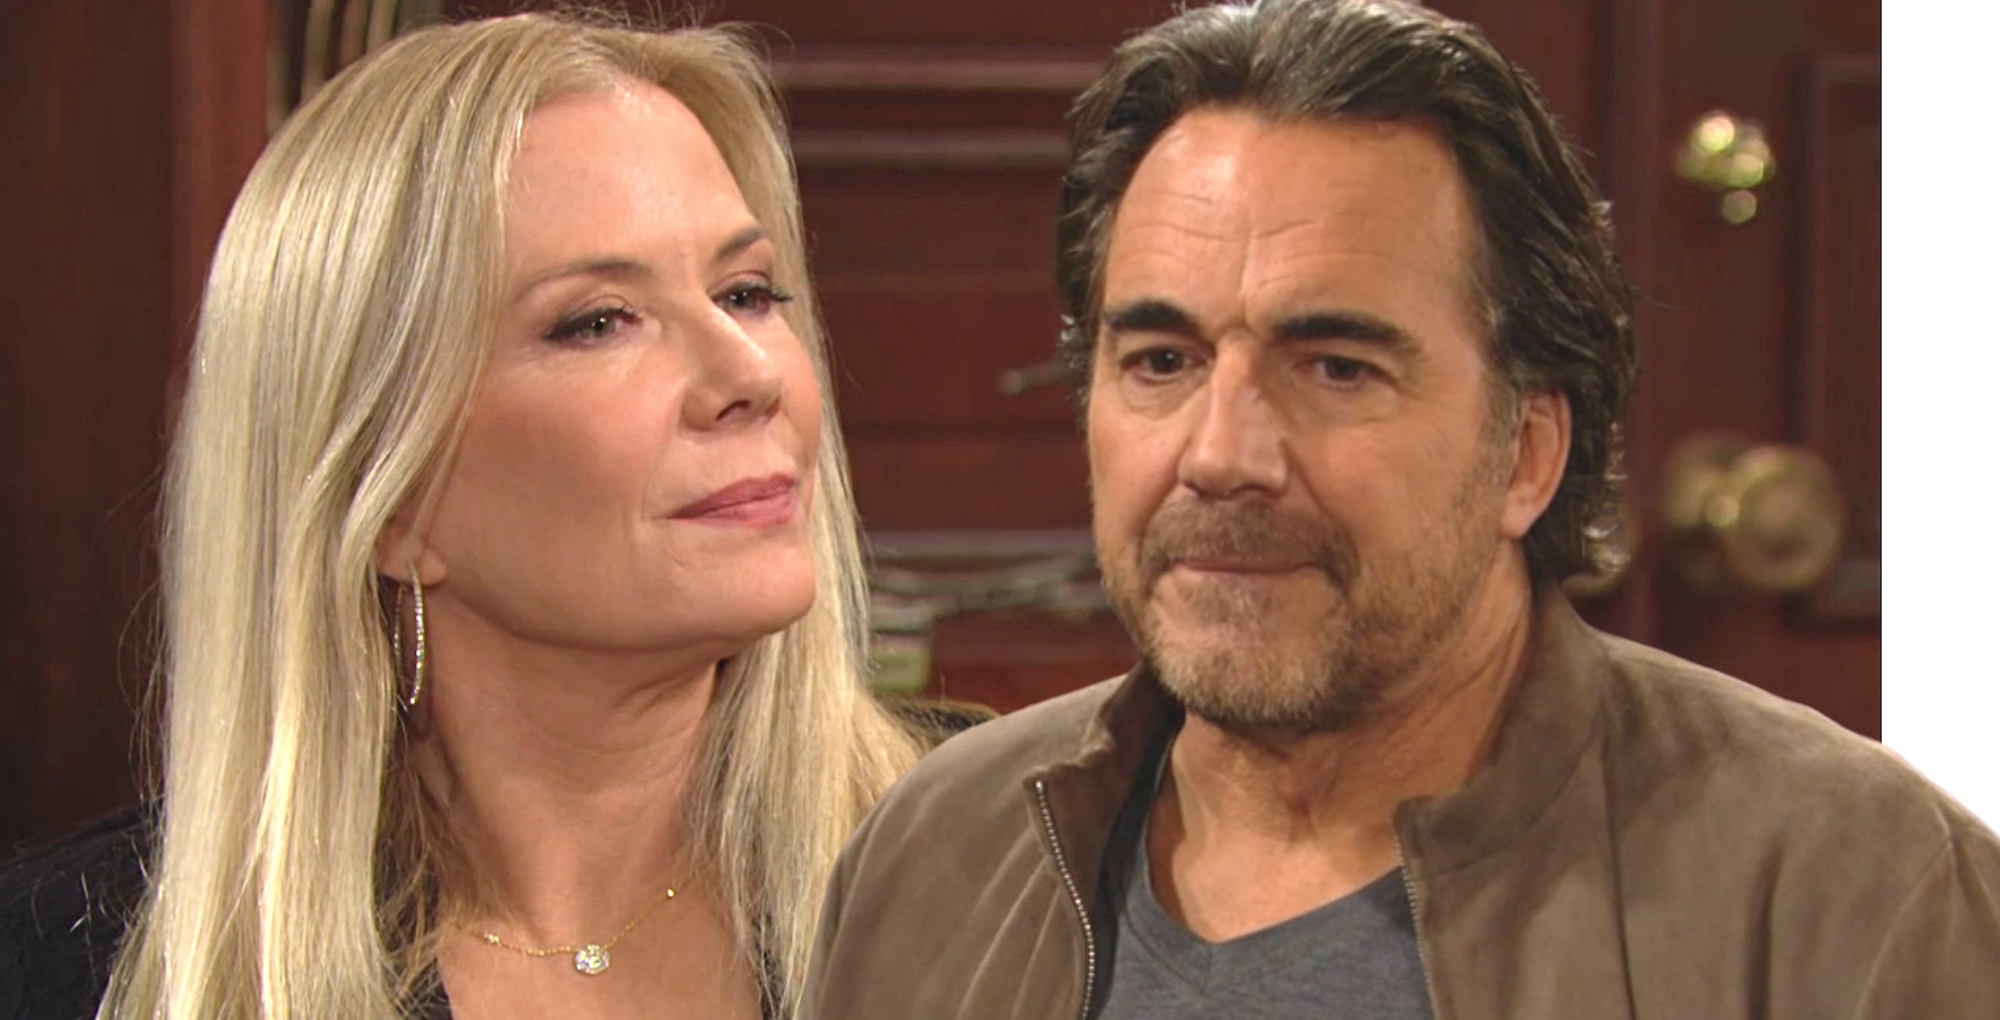 brooke logan may or may not finally get getting over ridge on bold and the beautiful